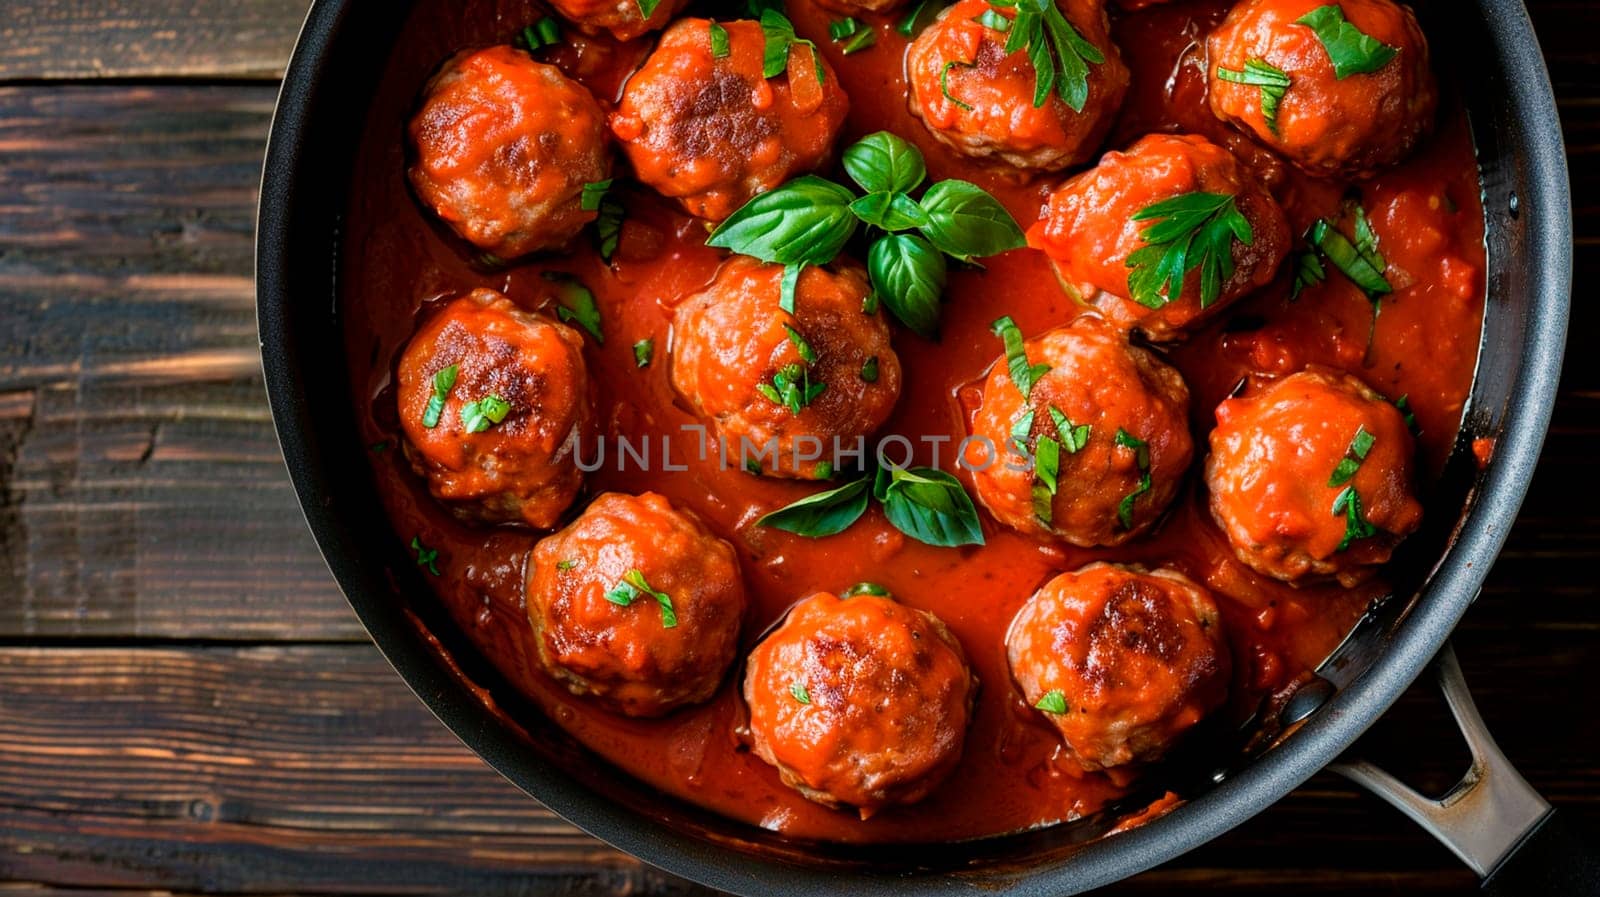 meatballs in tomato sauce in a pan. Selective focus. food.